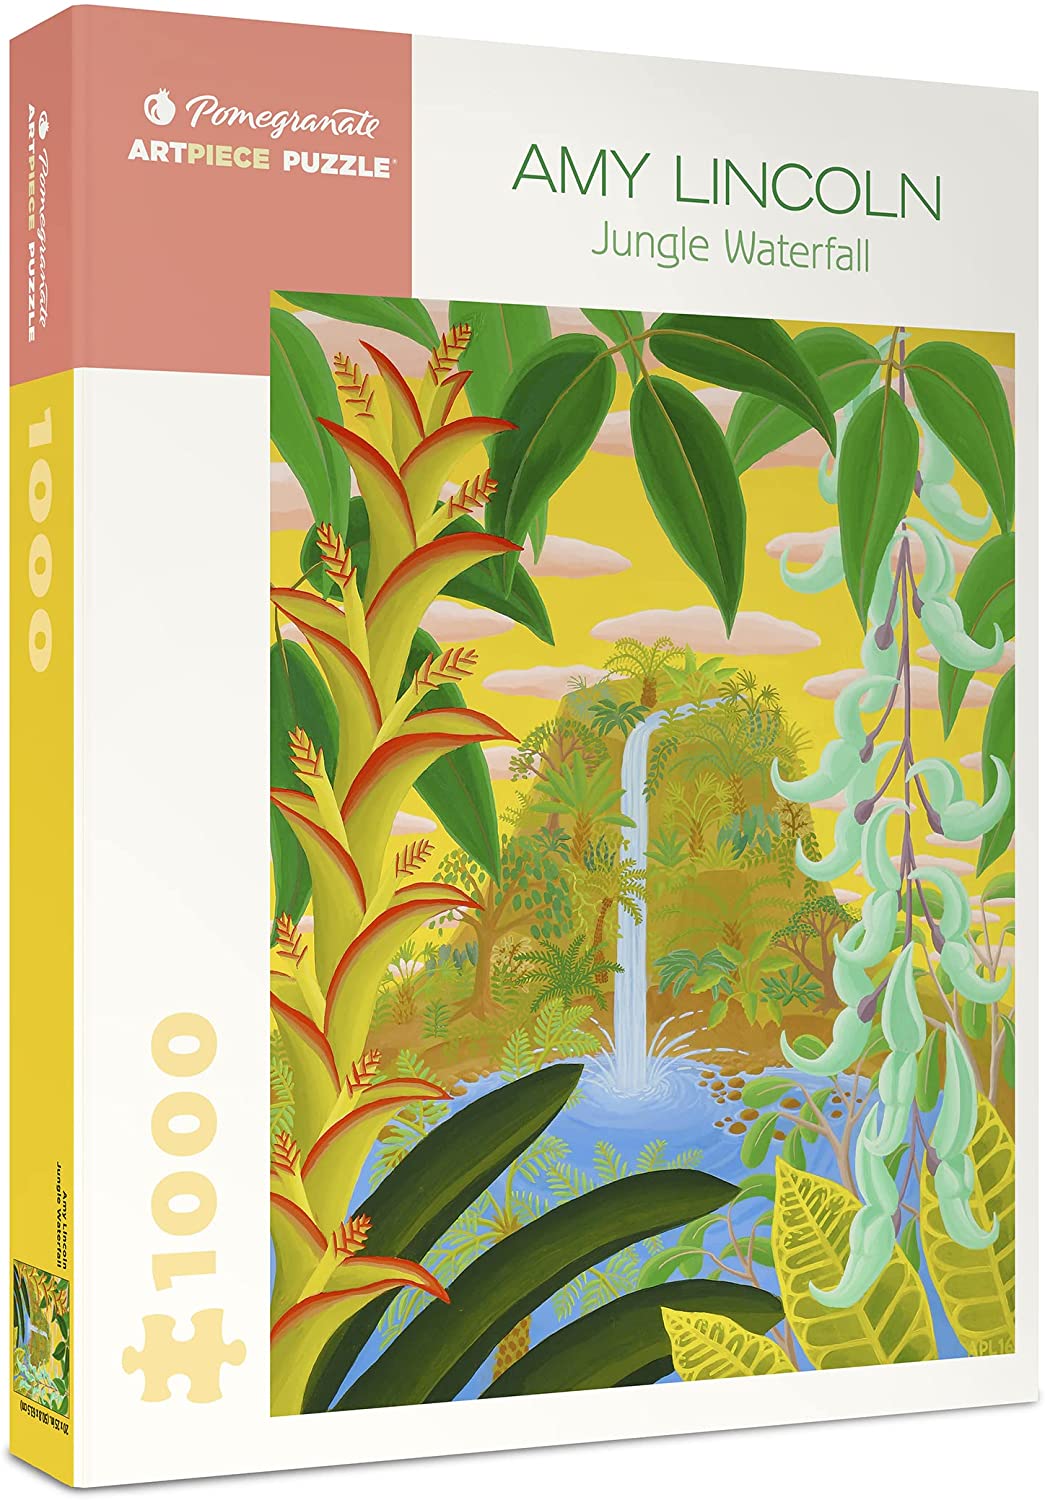 Puzzle: Amy Lincoln - Jungle Waterfall 1000 Pieces